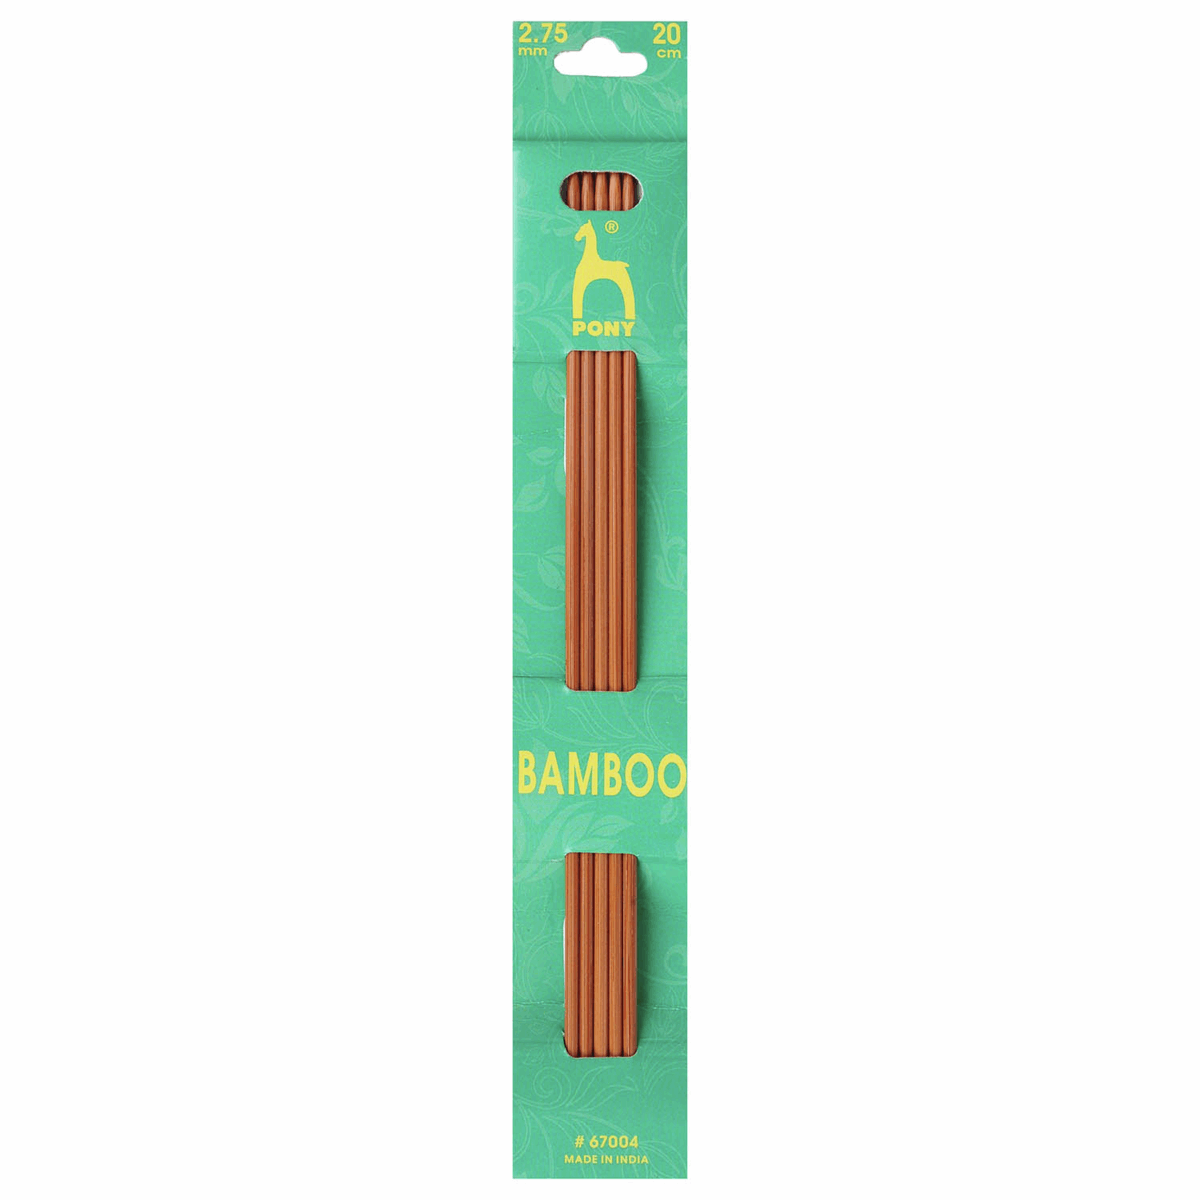 PONY Double-Ended Bamboo Knitting Pins - 20cm x 2.75mm (Set of 5)